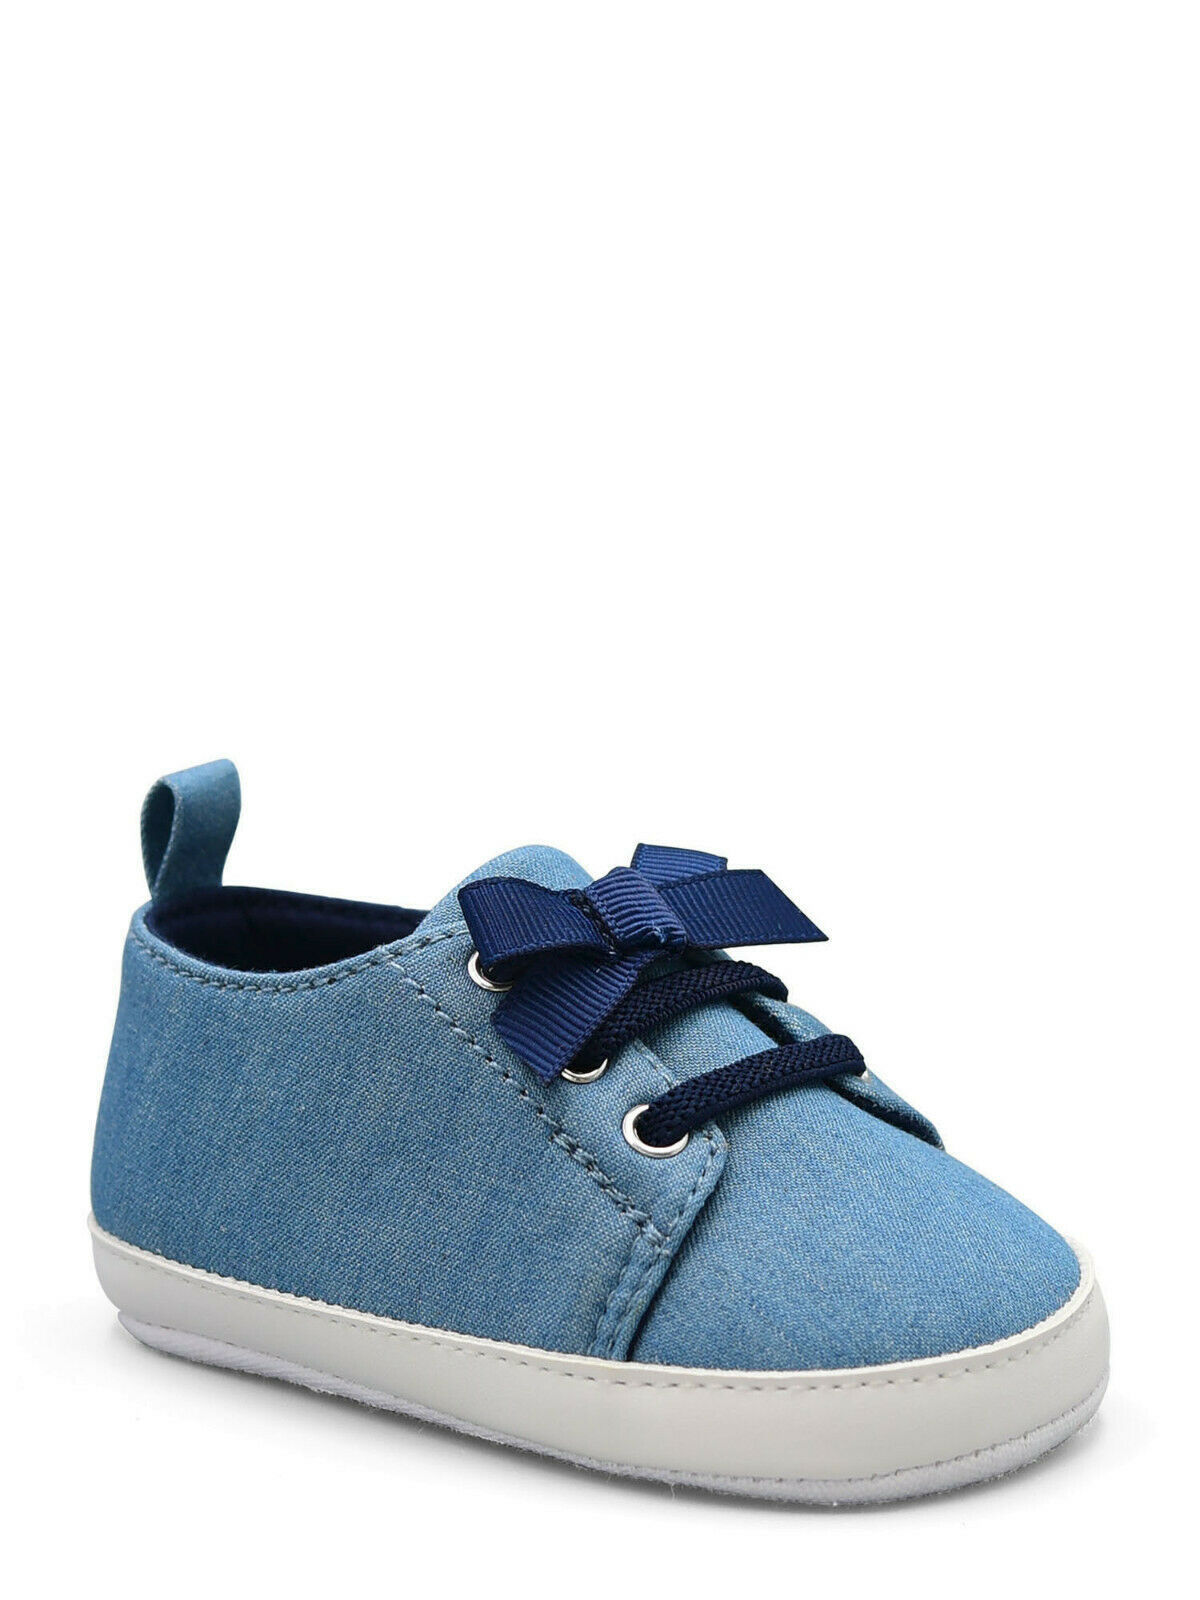 Child of Mine by Carter's Baby Girls' Chambray Sneaker